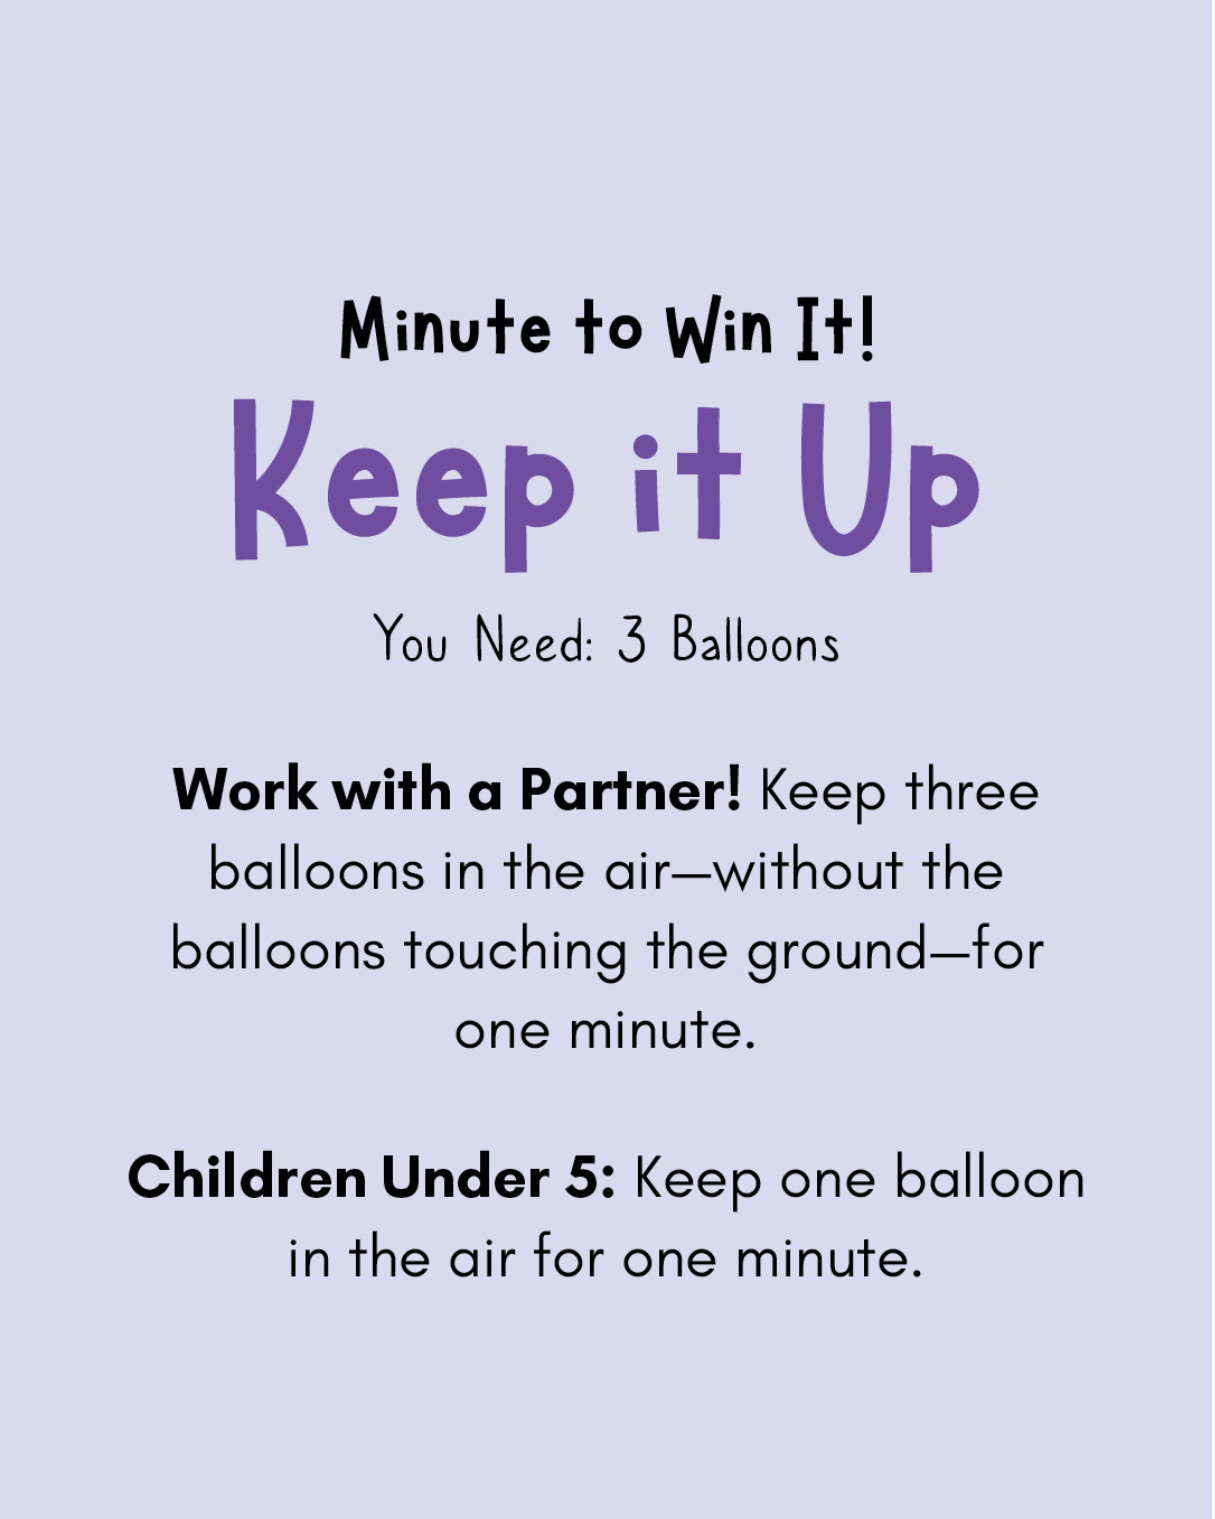 Minute to Win It Games for Families: Keep It Up